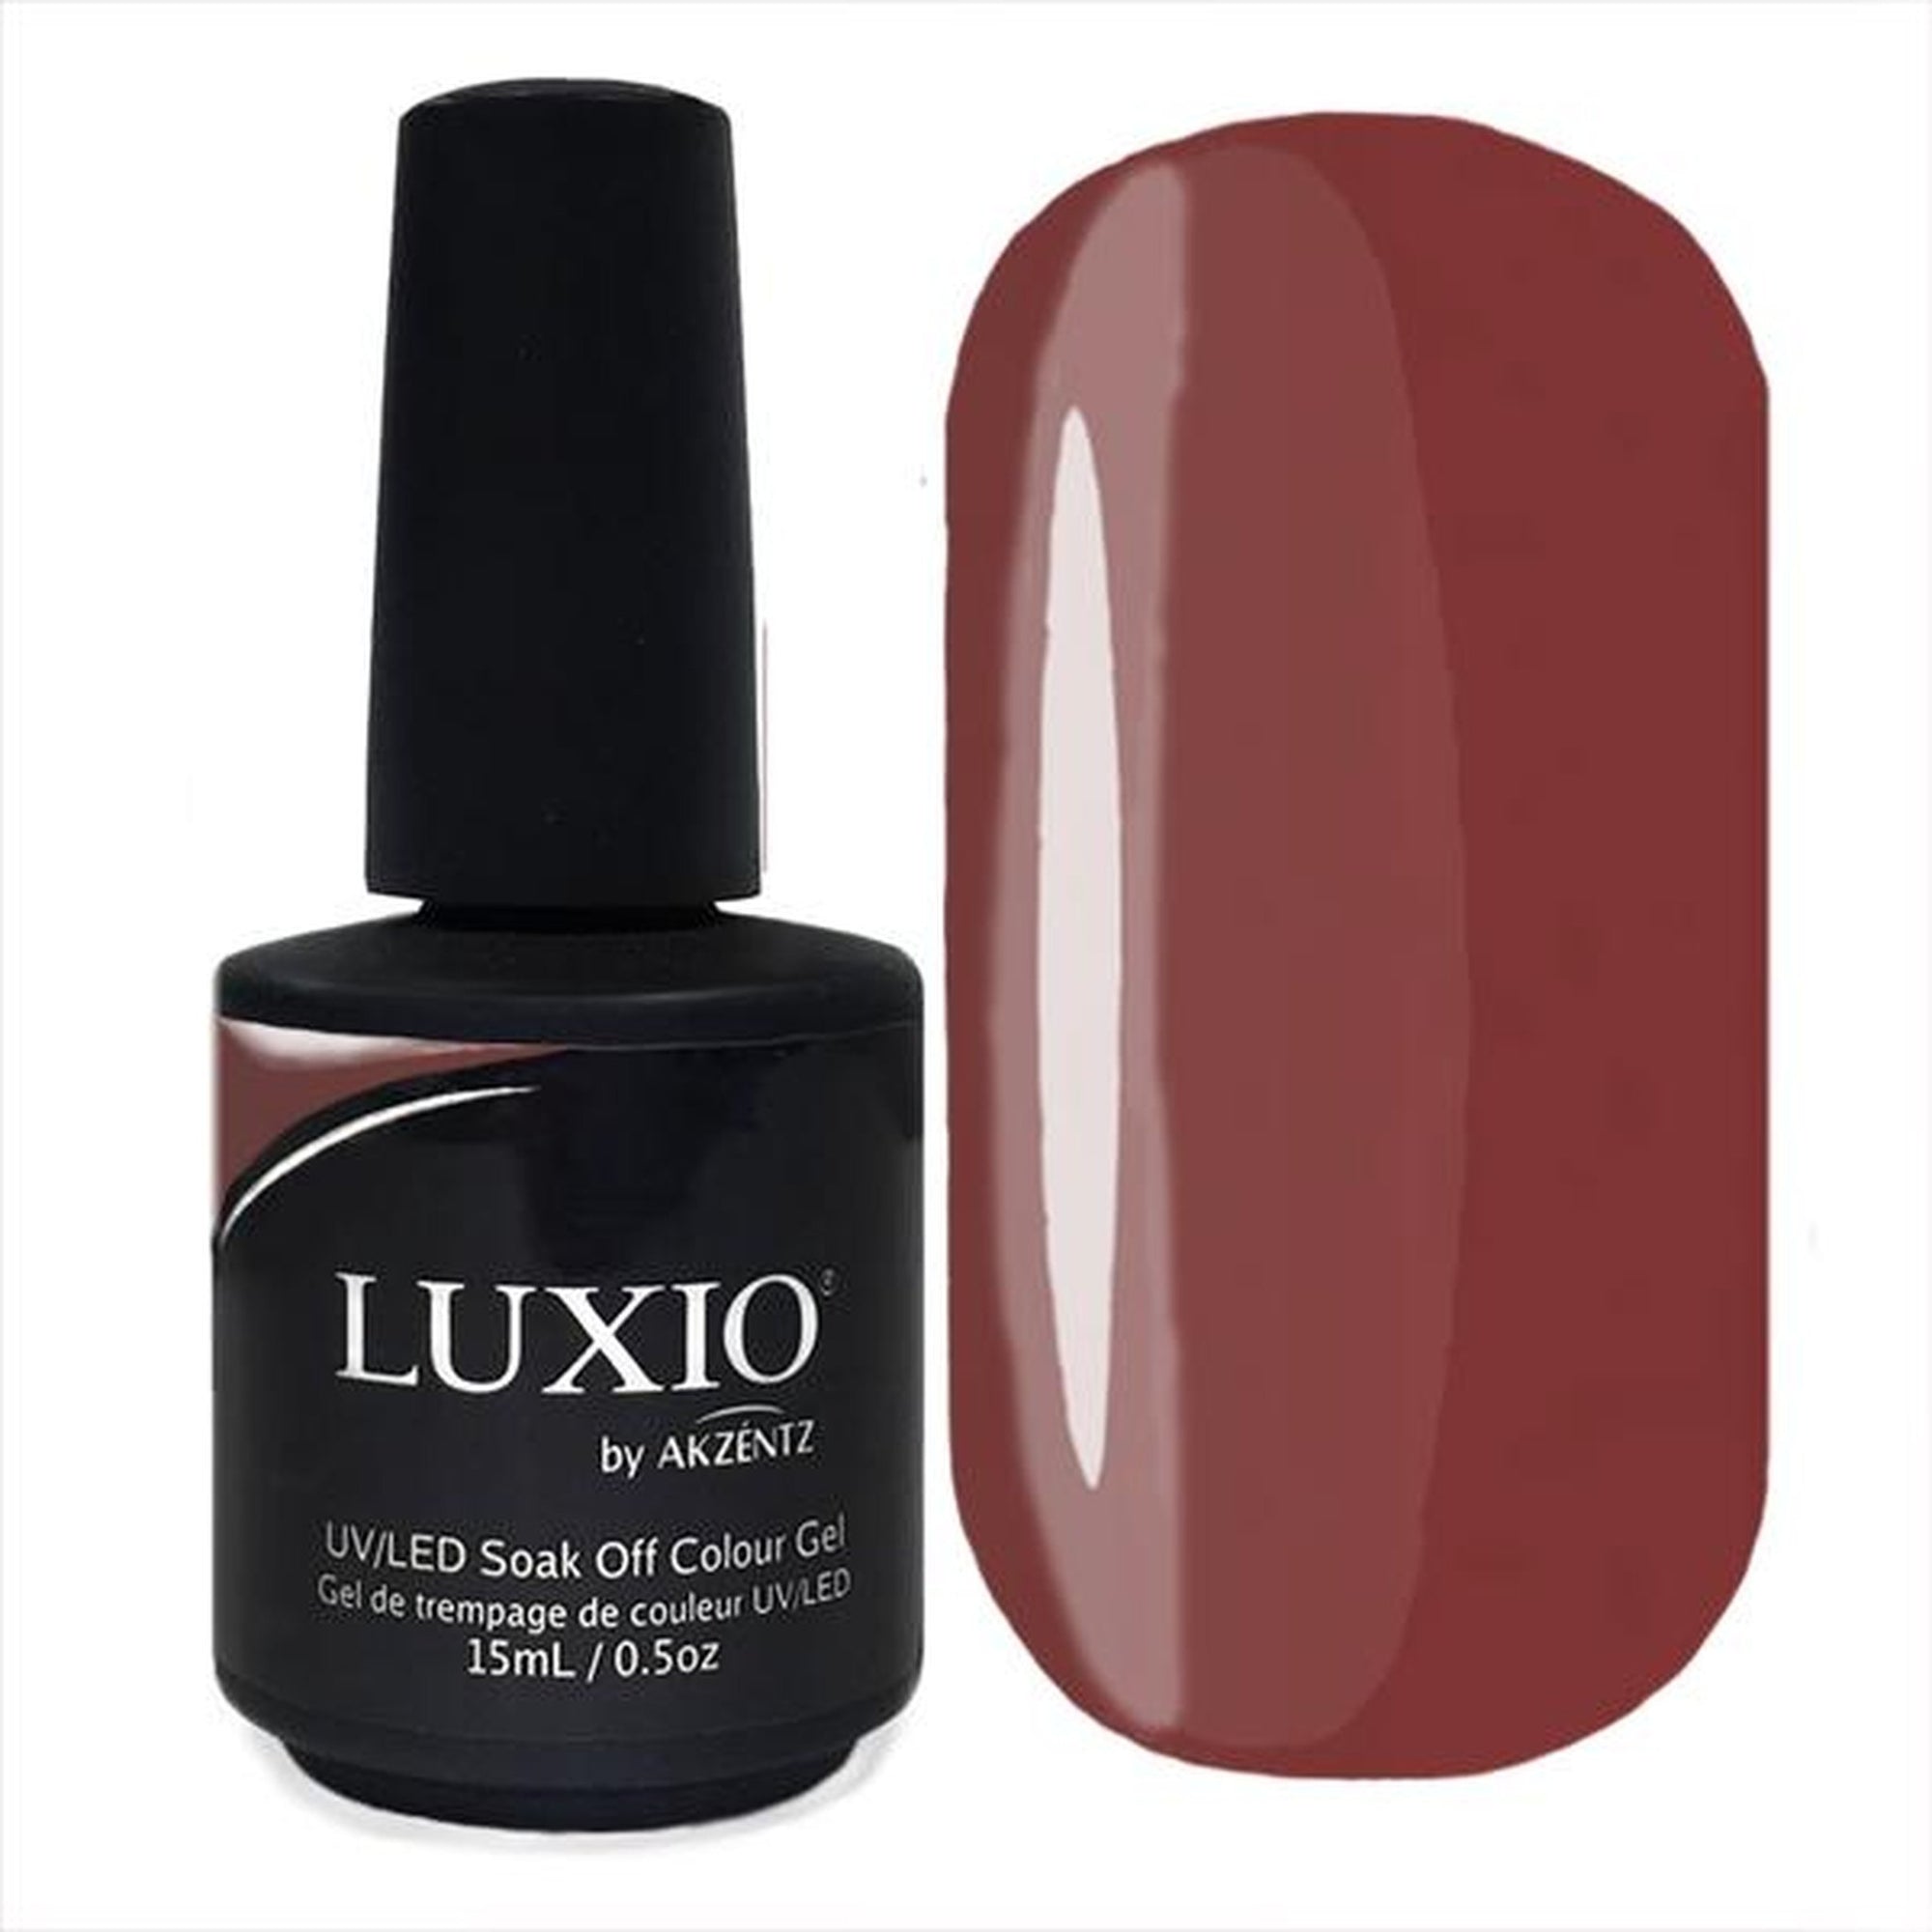 Luron Classy Queen Nude Easy to apply Nail Polish @ Best Price Online |  Jumia Kenya